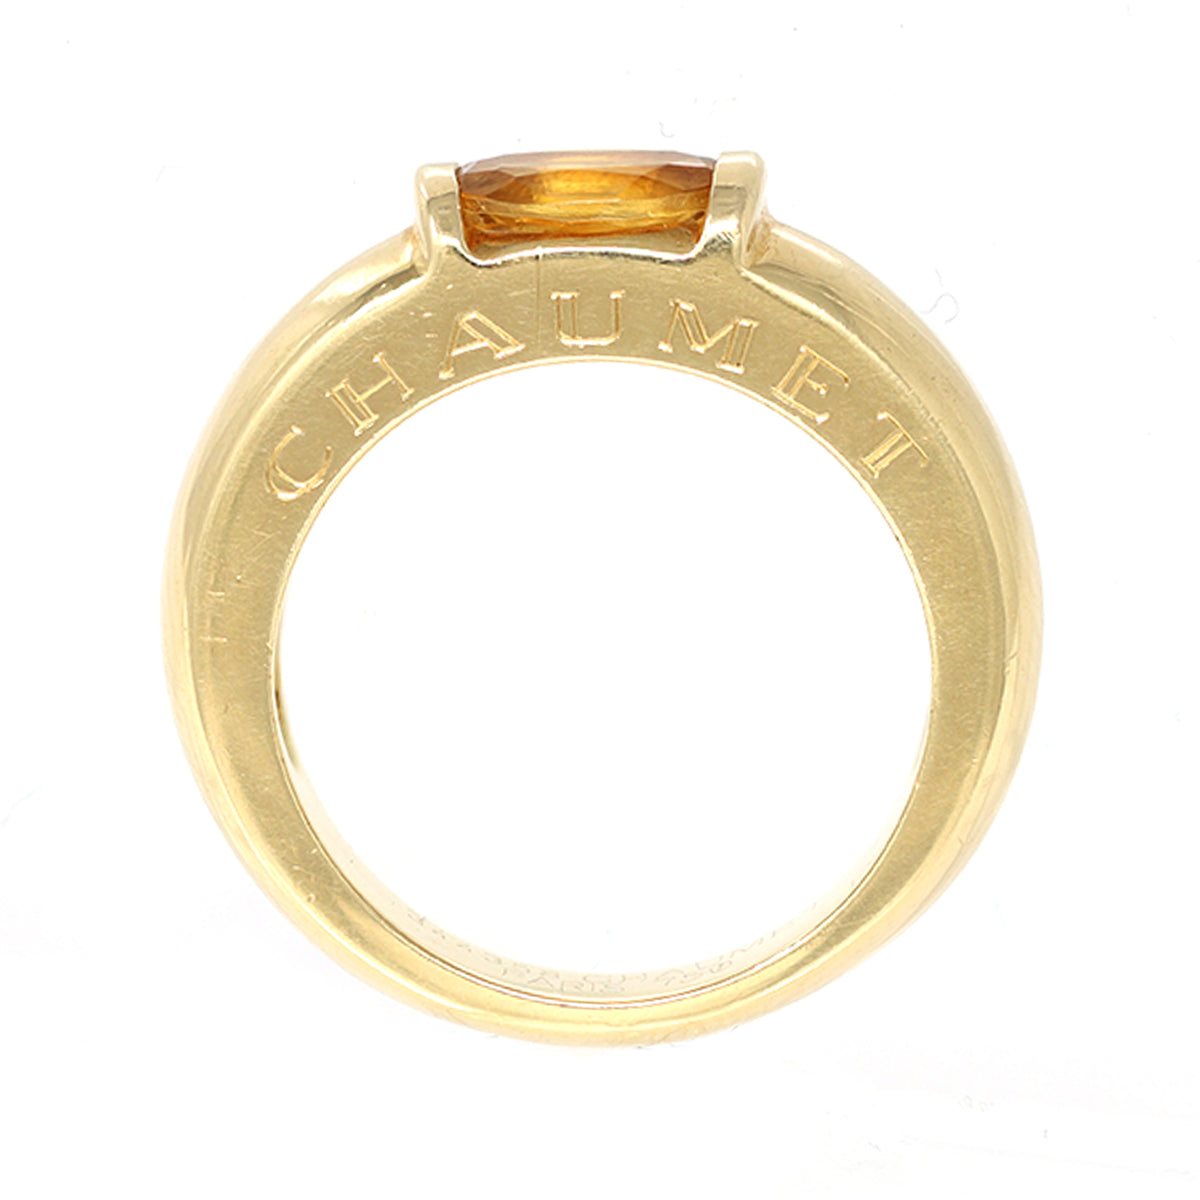 Signed Chaumet Paris Citrine Ring in 18k front view